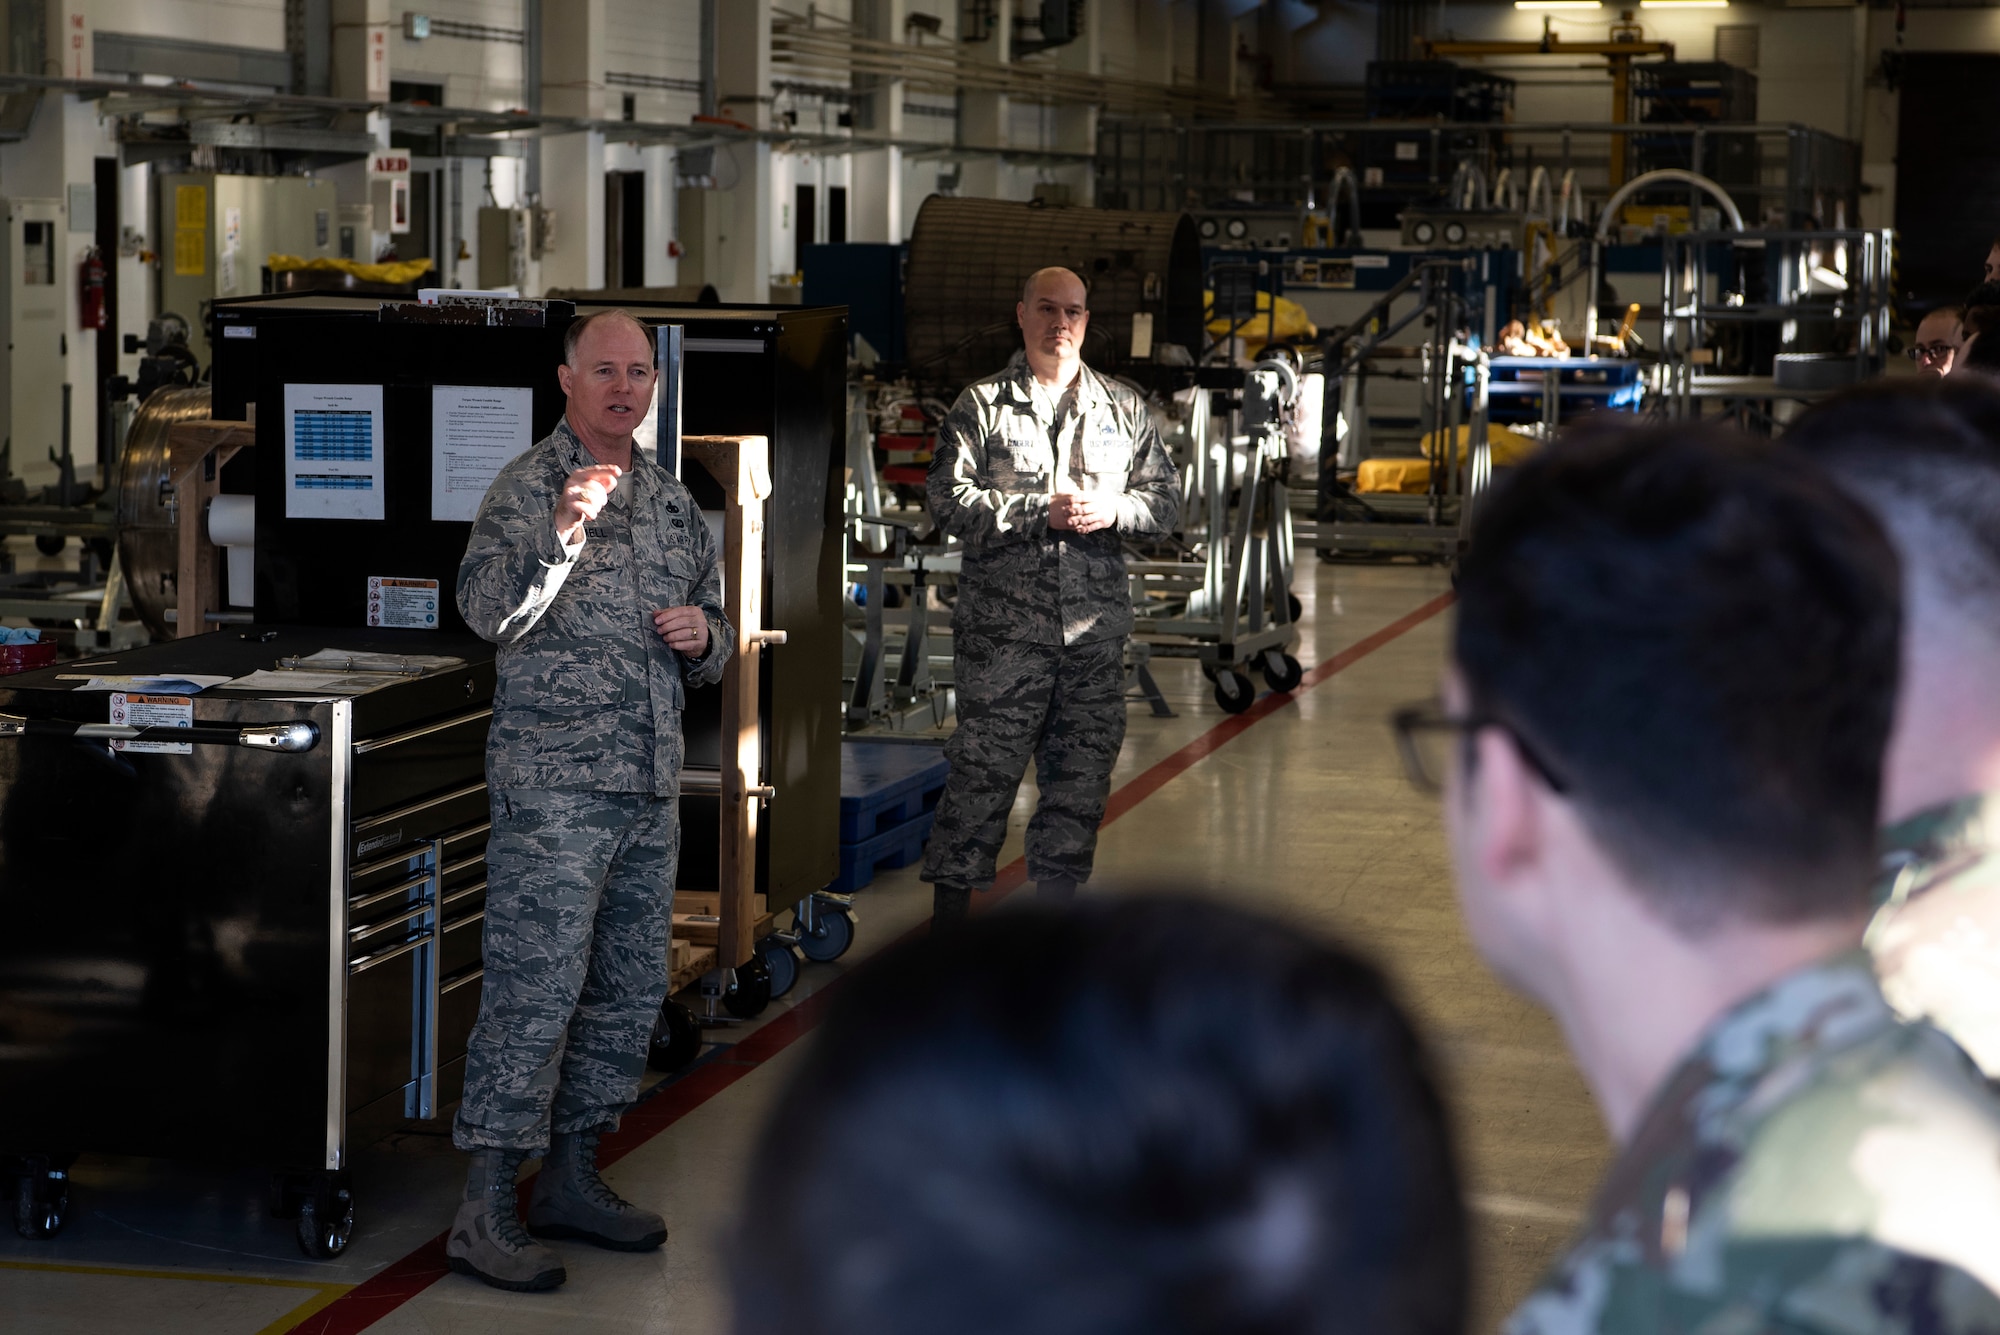 U.S. Air Force Col. Timothy Trimmell, 52nd Maintenance Group commander, left, speaks to 52nd MXS Propulsion Flight Airmen about their accomplishments at Spangdahlem Air Base, Germany, Feb. 6, 2020. Trimmell congratulated the Airmen on winning the Air Force Chief of Safety: Aviation Maintenance Safety Award. The flight is responsible for building and fixing aircraft engines for multiple wings and commands in Europe.  (U.S. Air Force photo by Airman 1st Class Valerie Seelye)